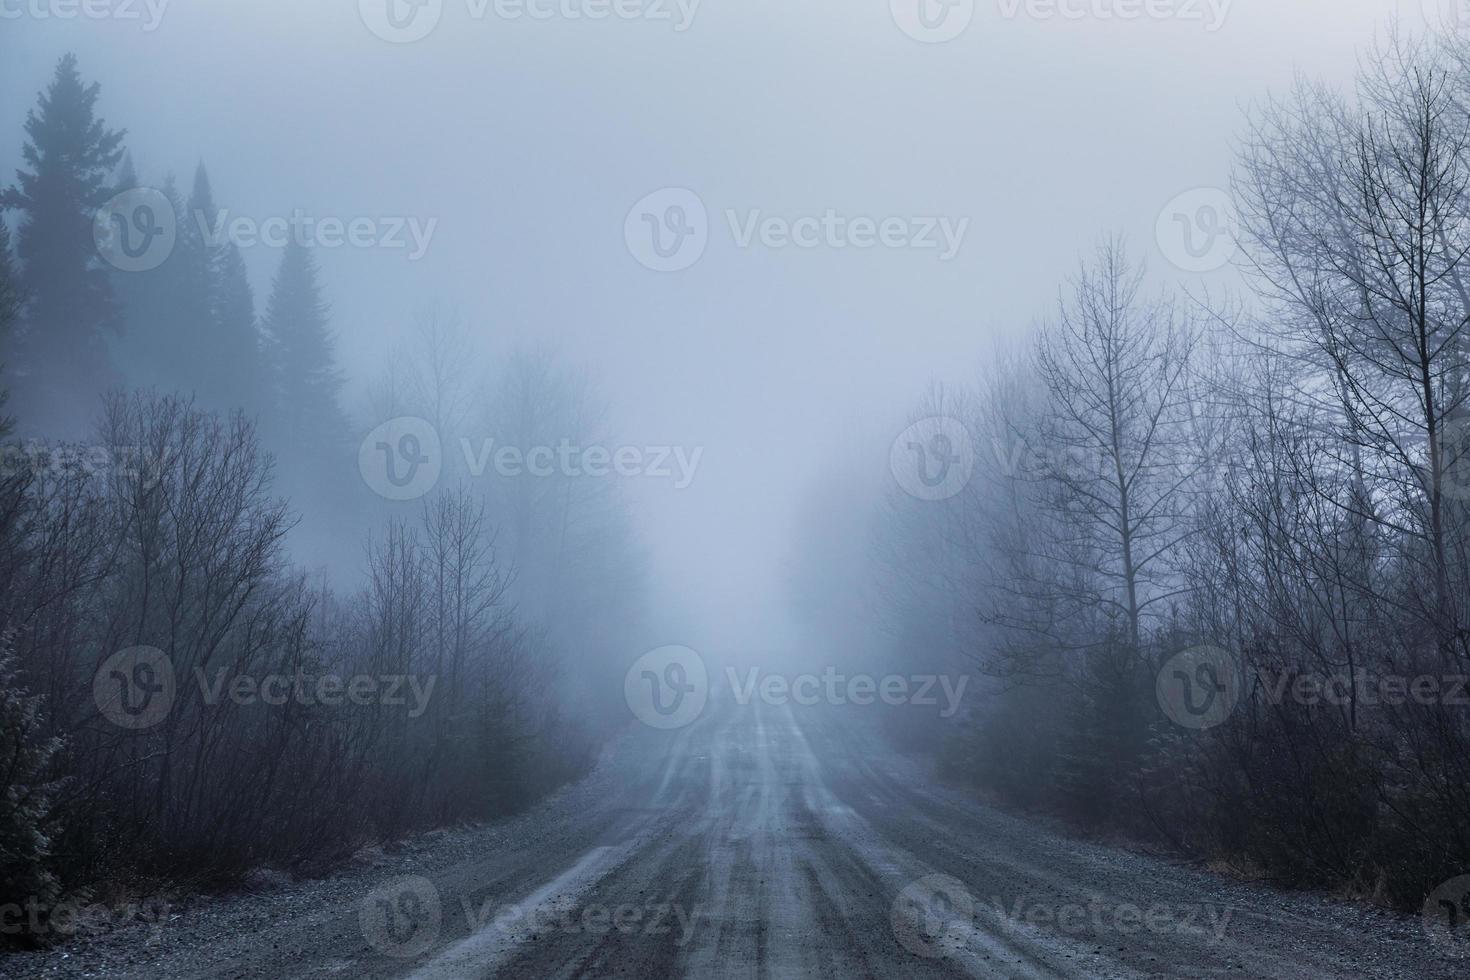 Spooky Fog and Bad Visibility on a Rural Road in Forest photo